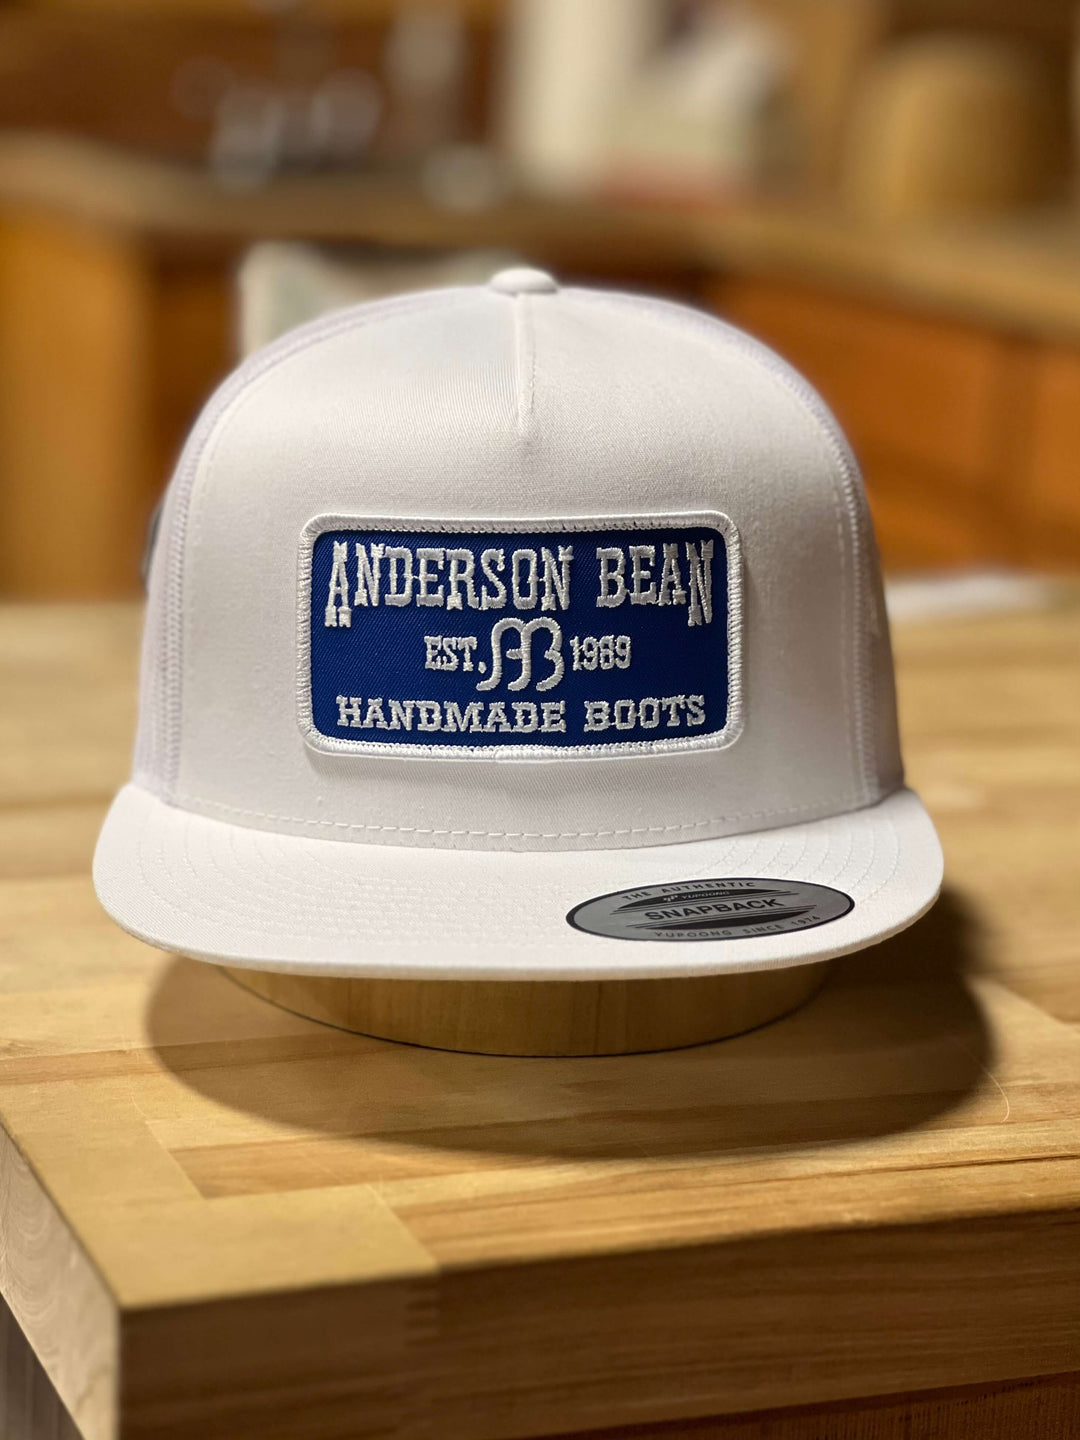 Anderson Bean Handmade Boots Snapback Hat, white with blue and white logo patch